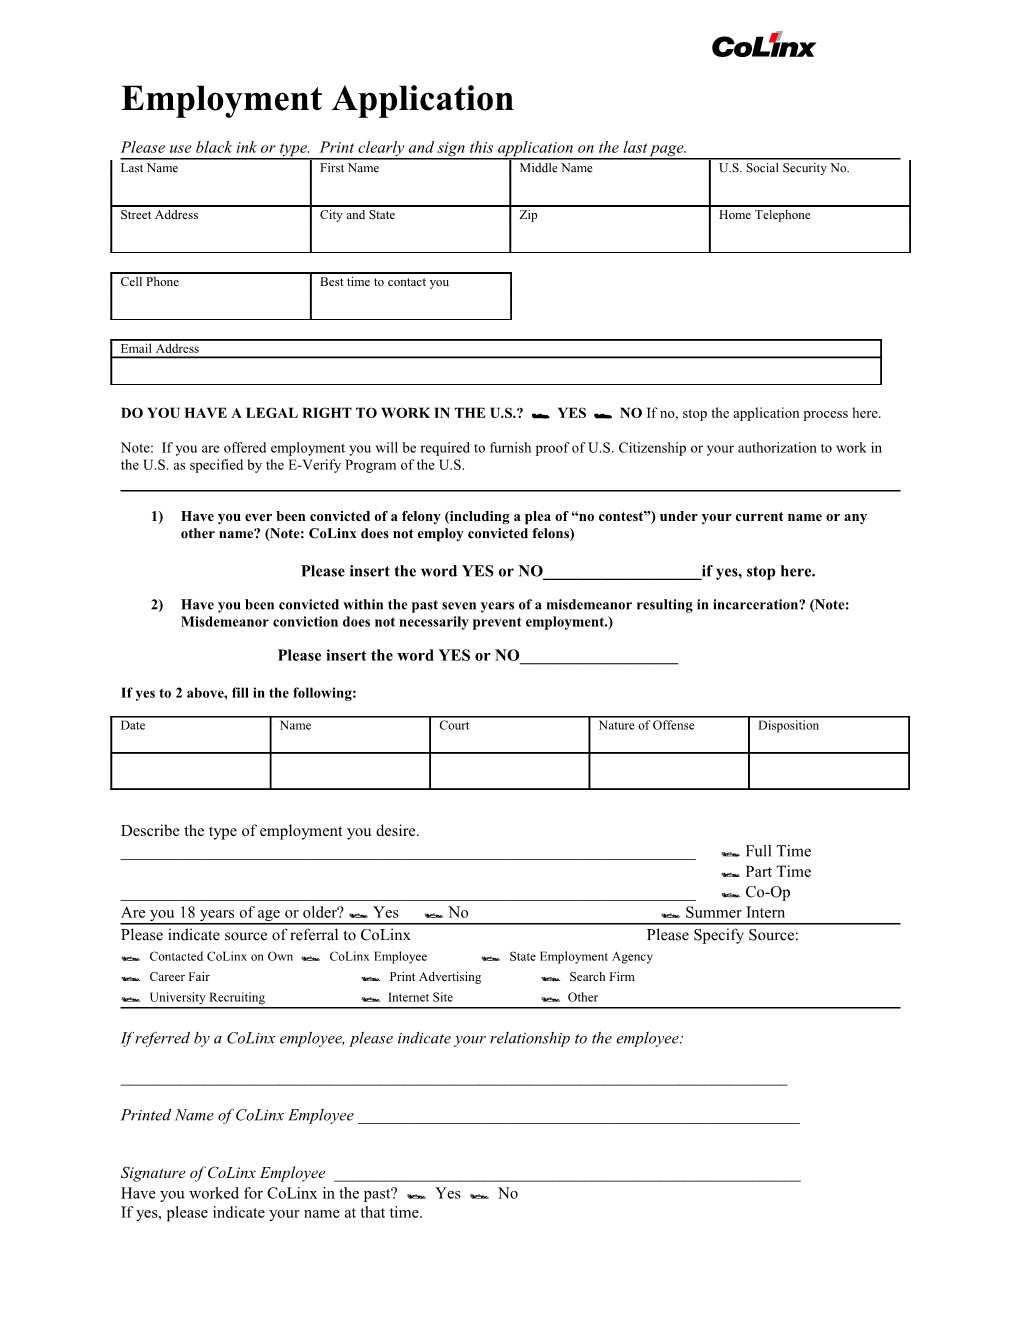 Please Use Black Ink Or Type. Print Clearly and Sign This Application on the Last Page